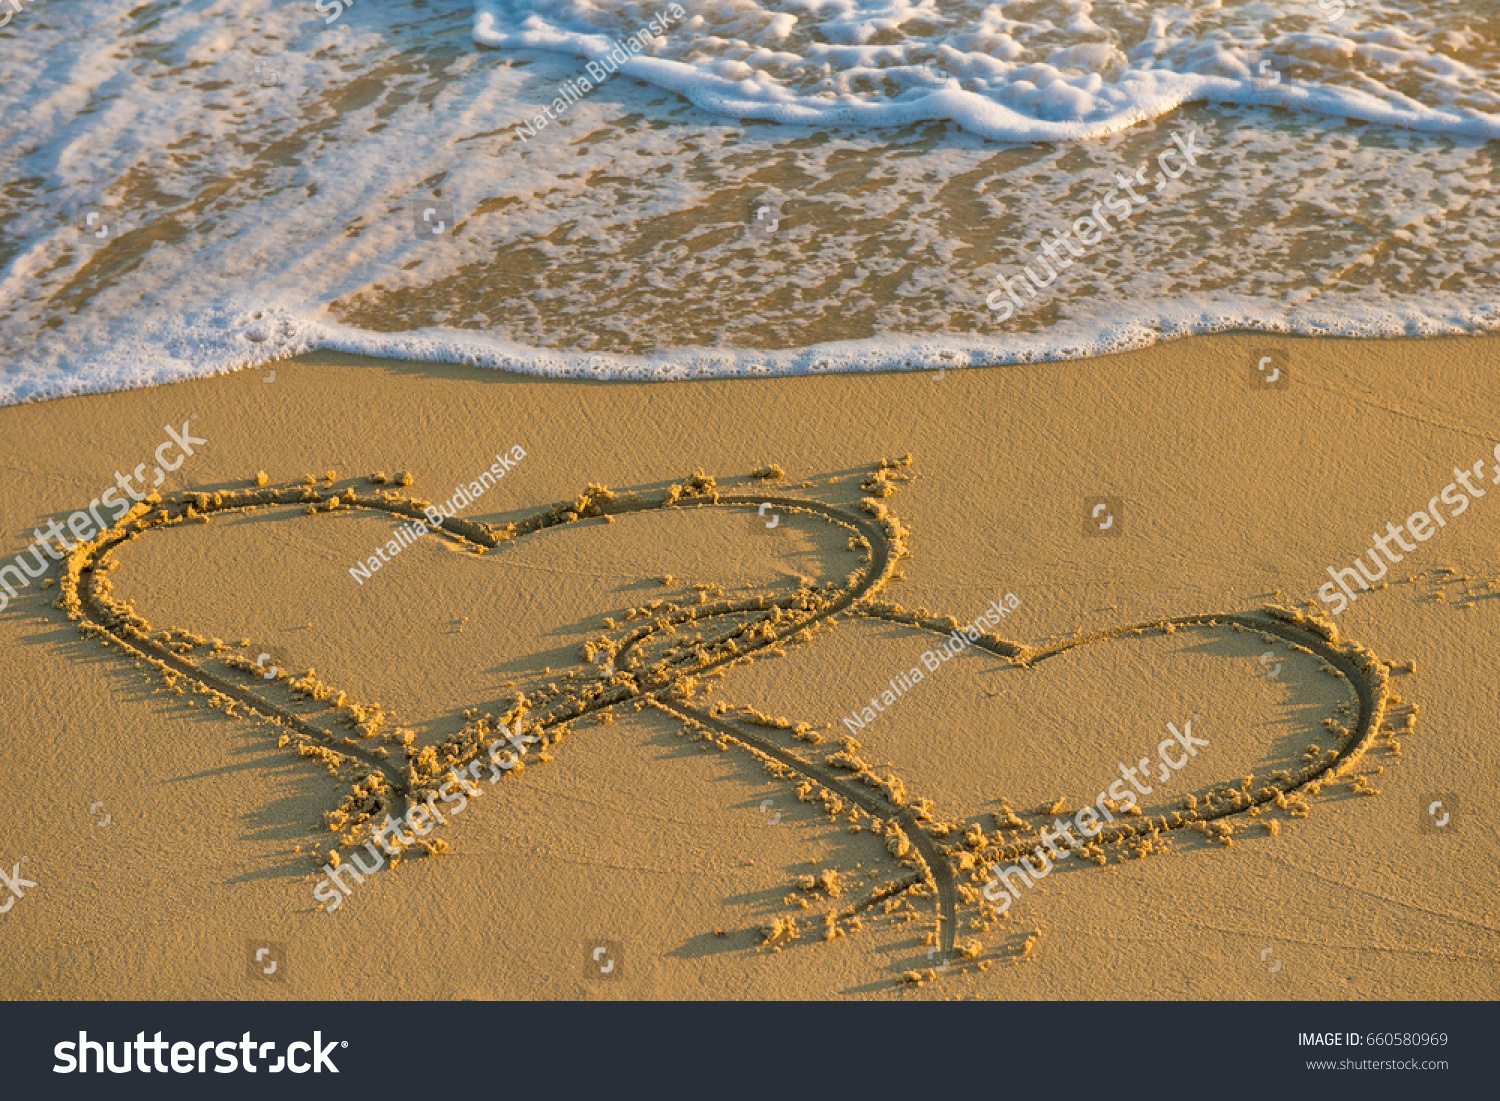 Two hearts together. Heart on a wet sand. Painted heart. Season of travel. Summer trips to the sea. Concept of leisure and travel. Waves wash away the painted heart on the sand
 #660580969